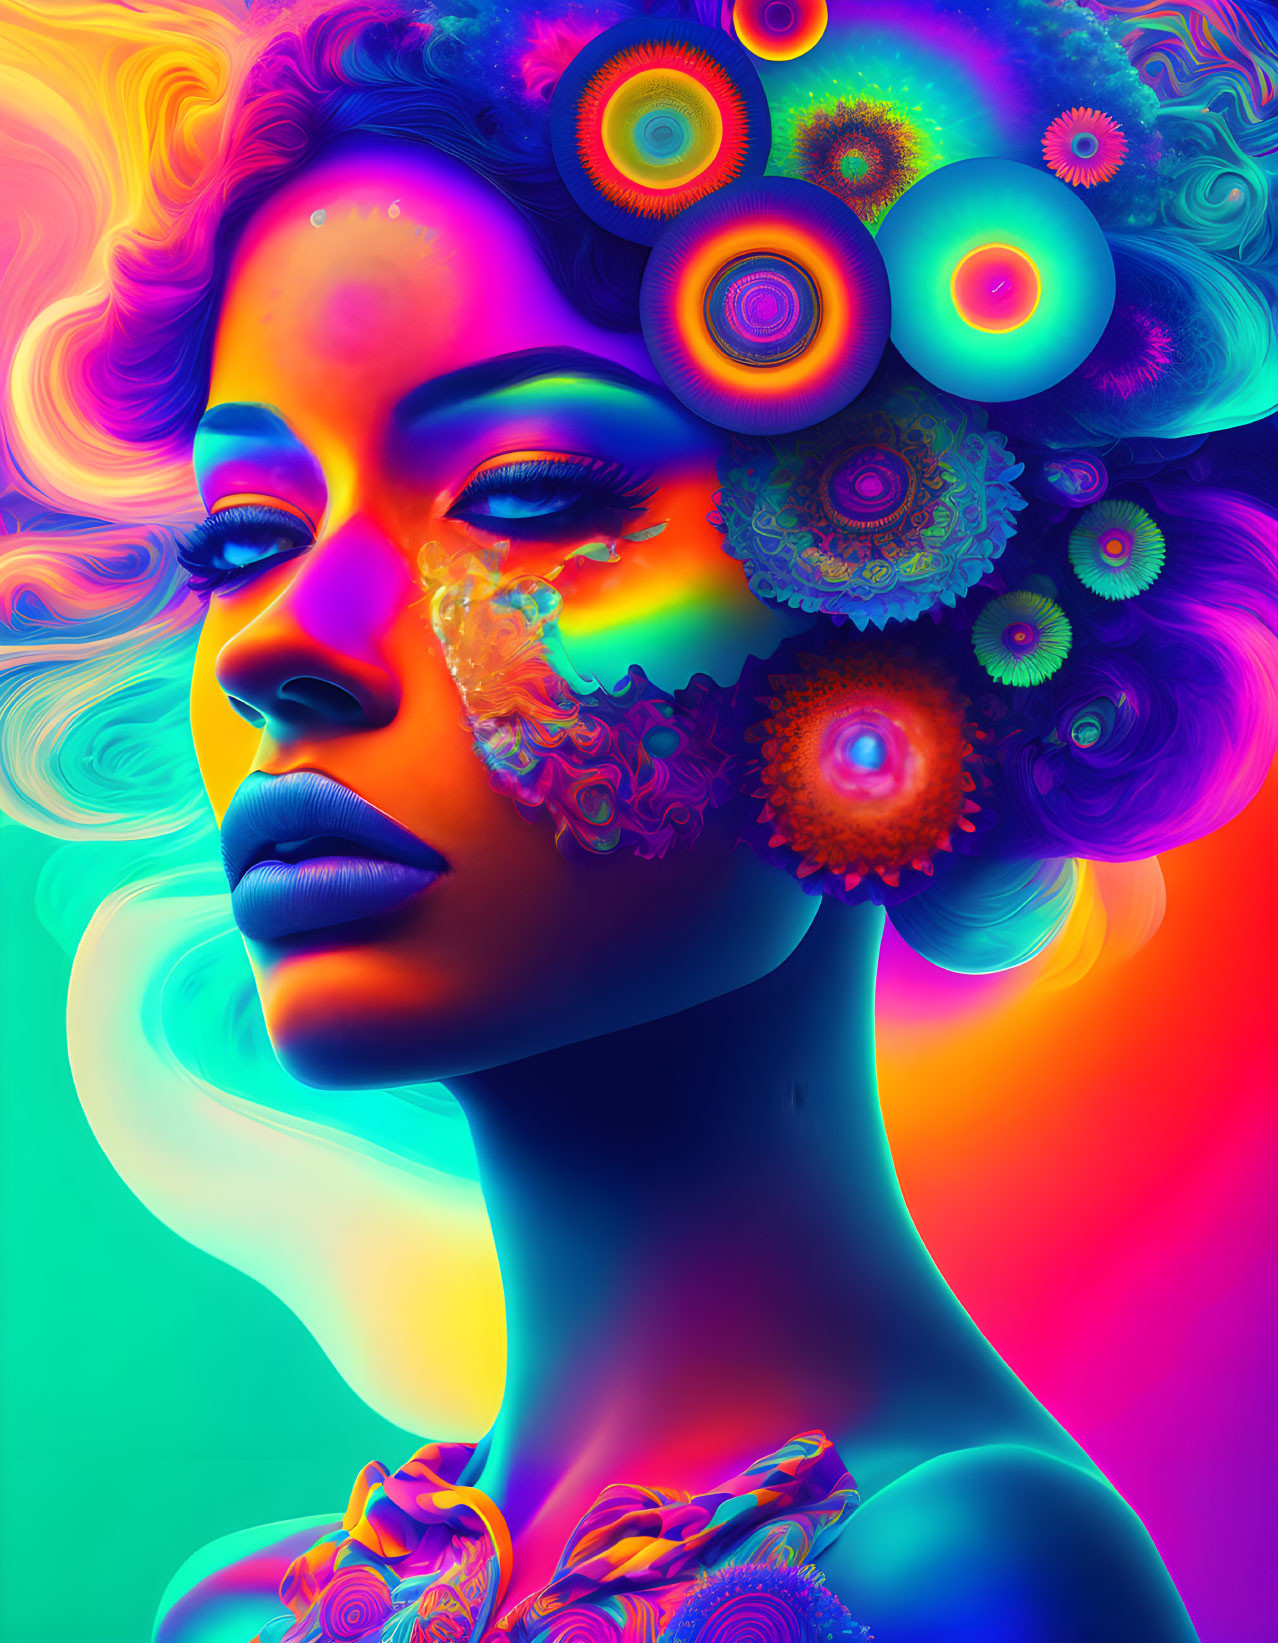 Colorful portrait of a woman with surreal fractal patterns on face against neon background